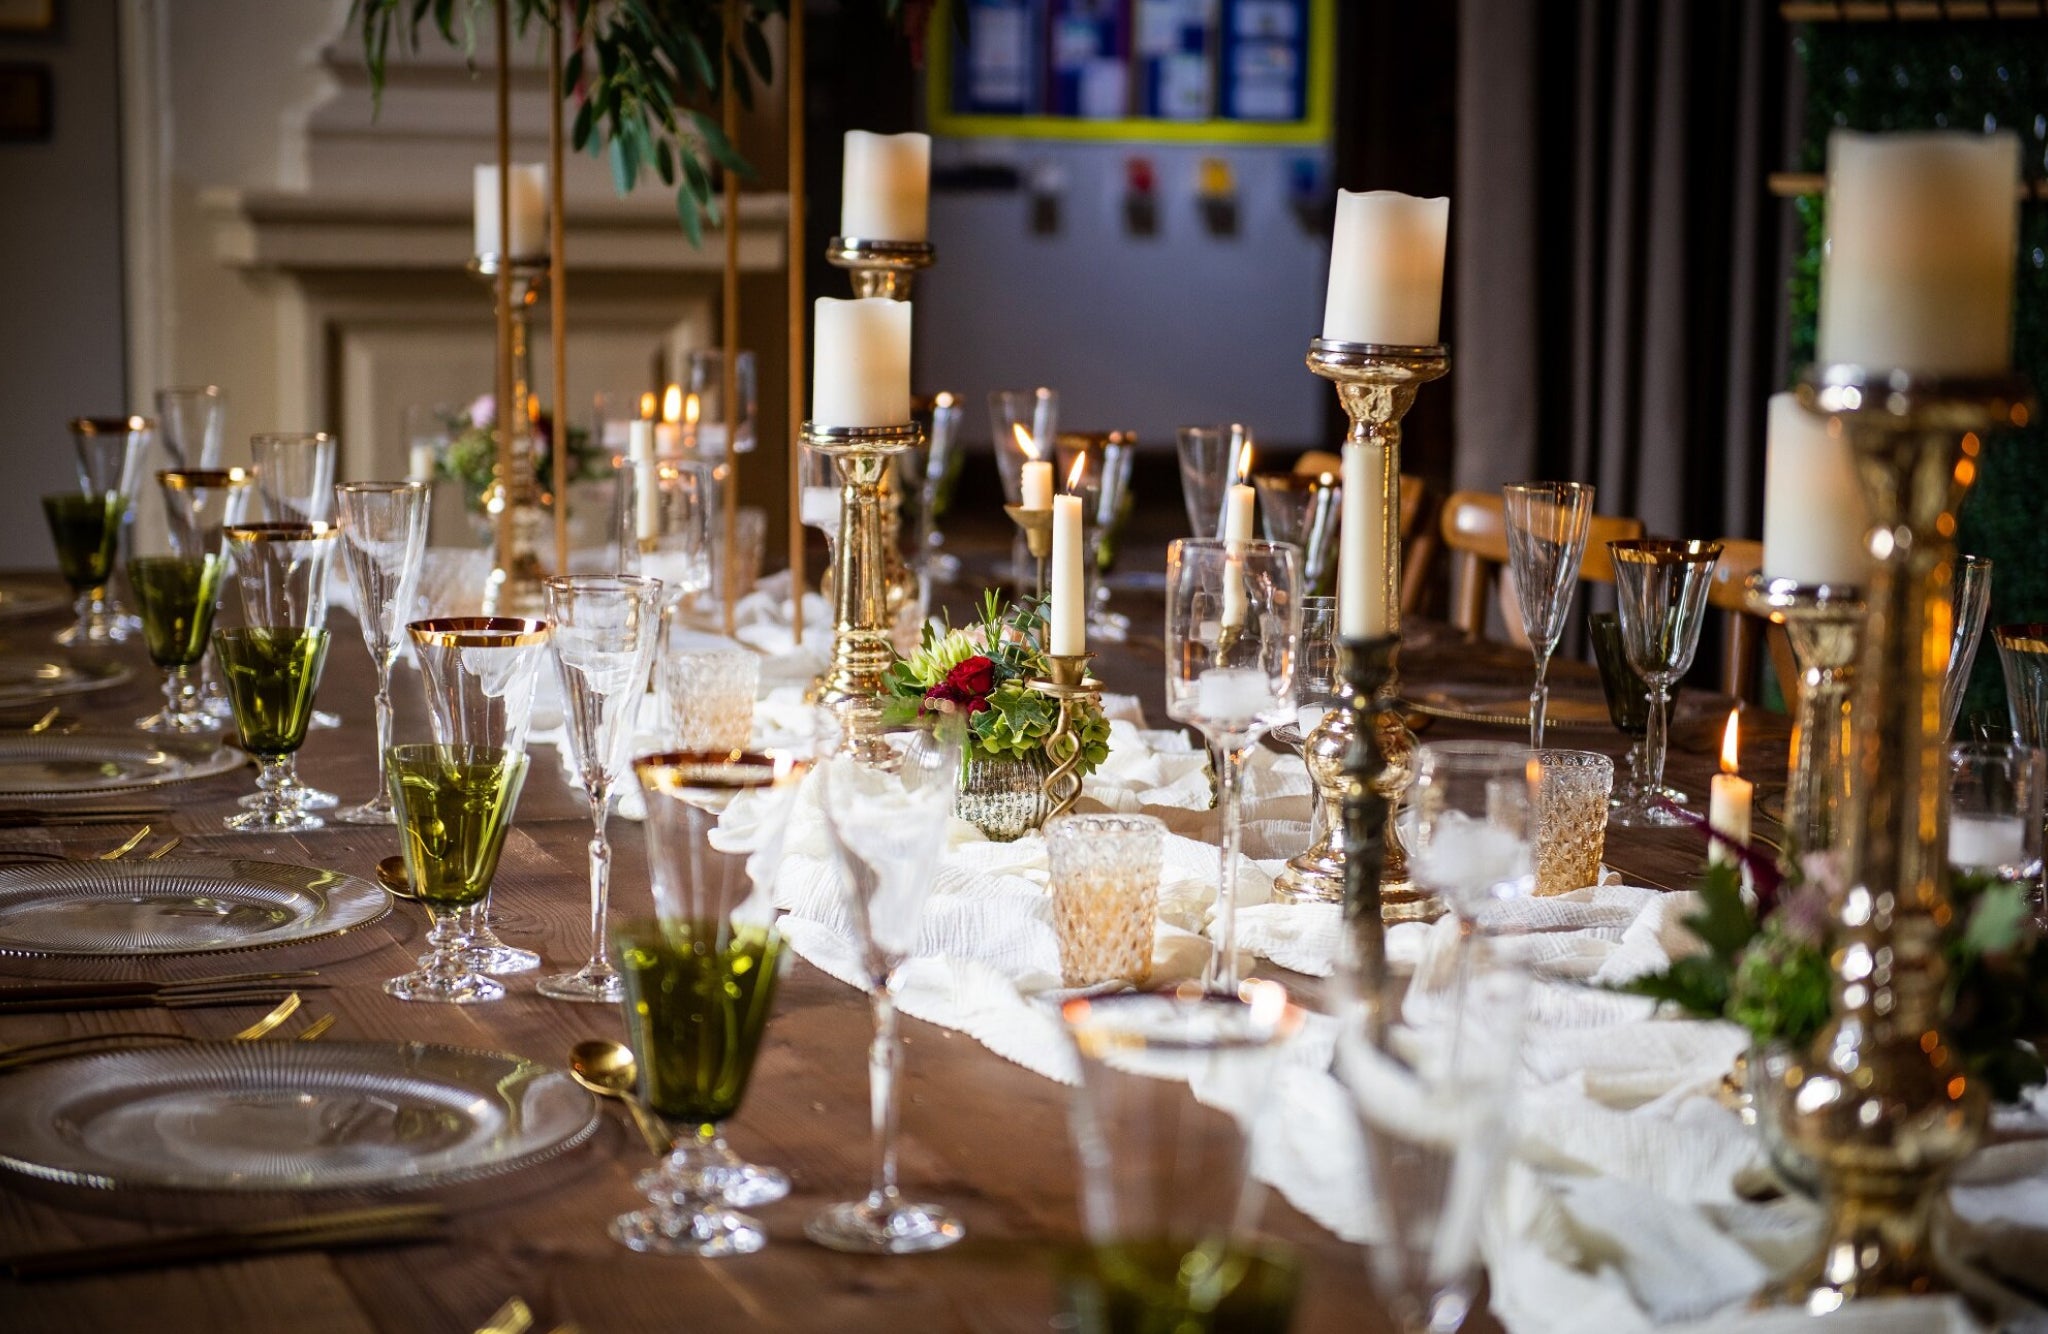 decorating wedding tables with candles